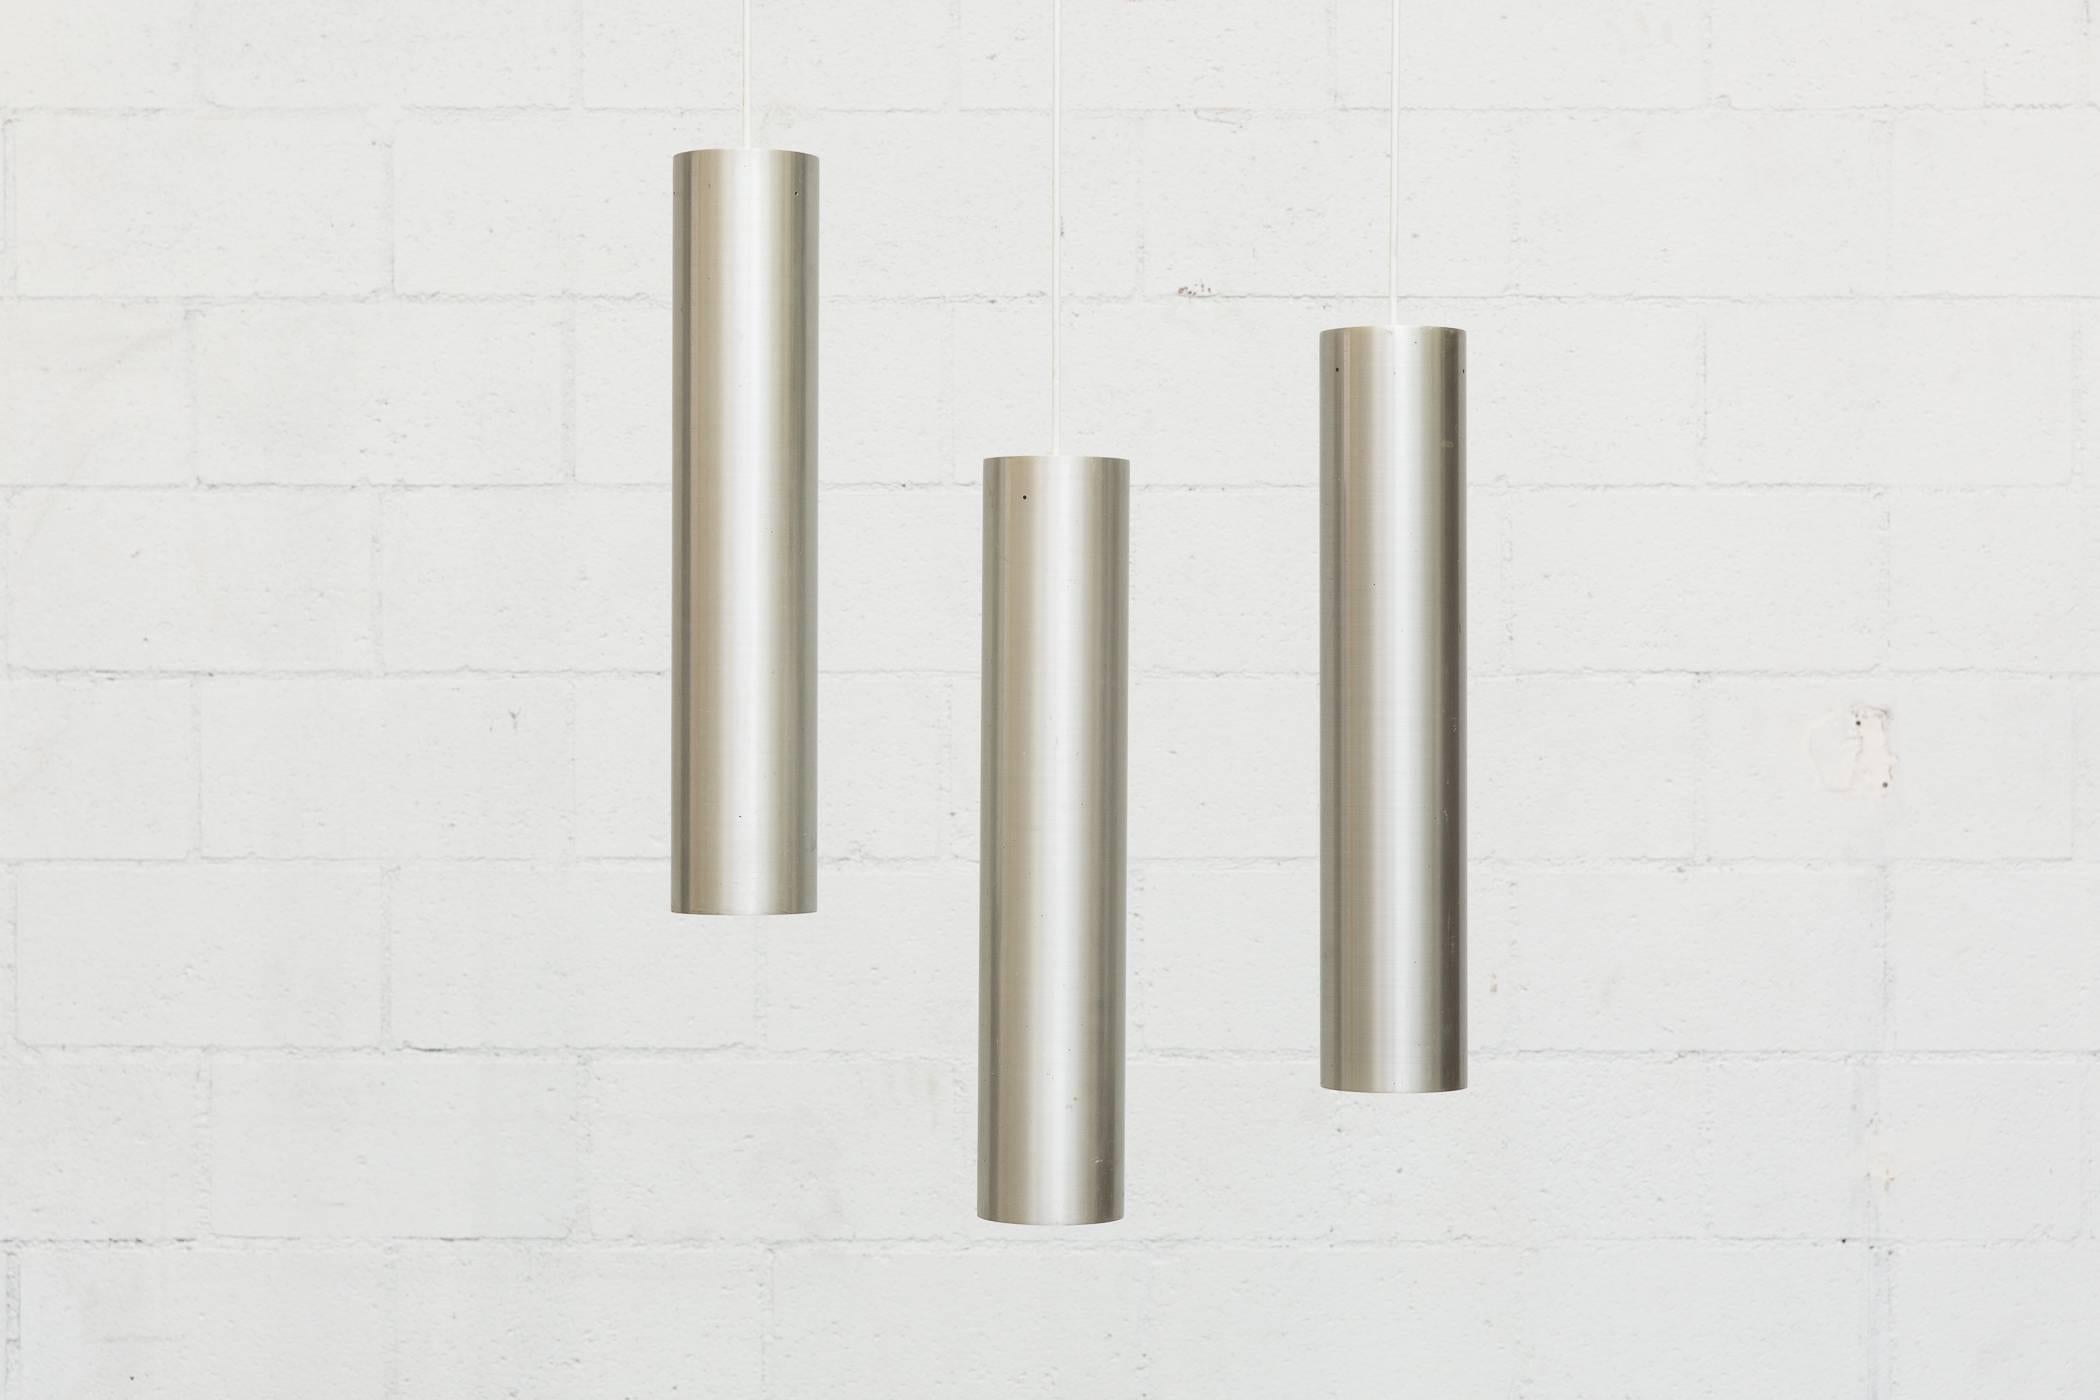 Mid-century, 1960s, set of three elongated brushed aluminum tubular pendants. Manufactured by renowned Dutch lighting company Raak Lichtarchitectuur out of Amsterdam. Founded in 1954 by Carel O. Lockhorn (who originally worked for Philips) the